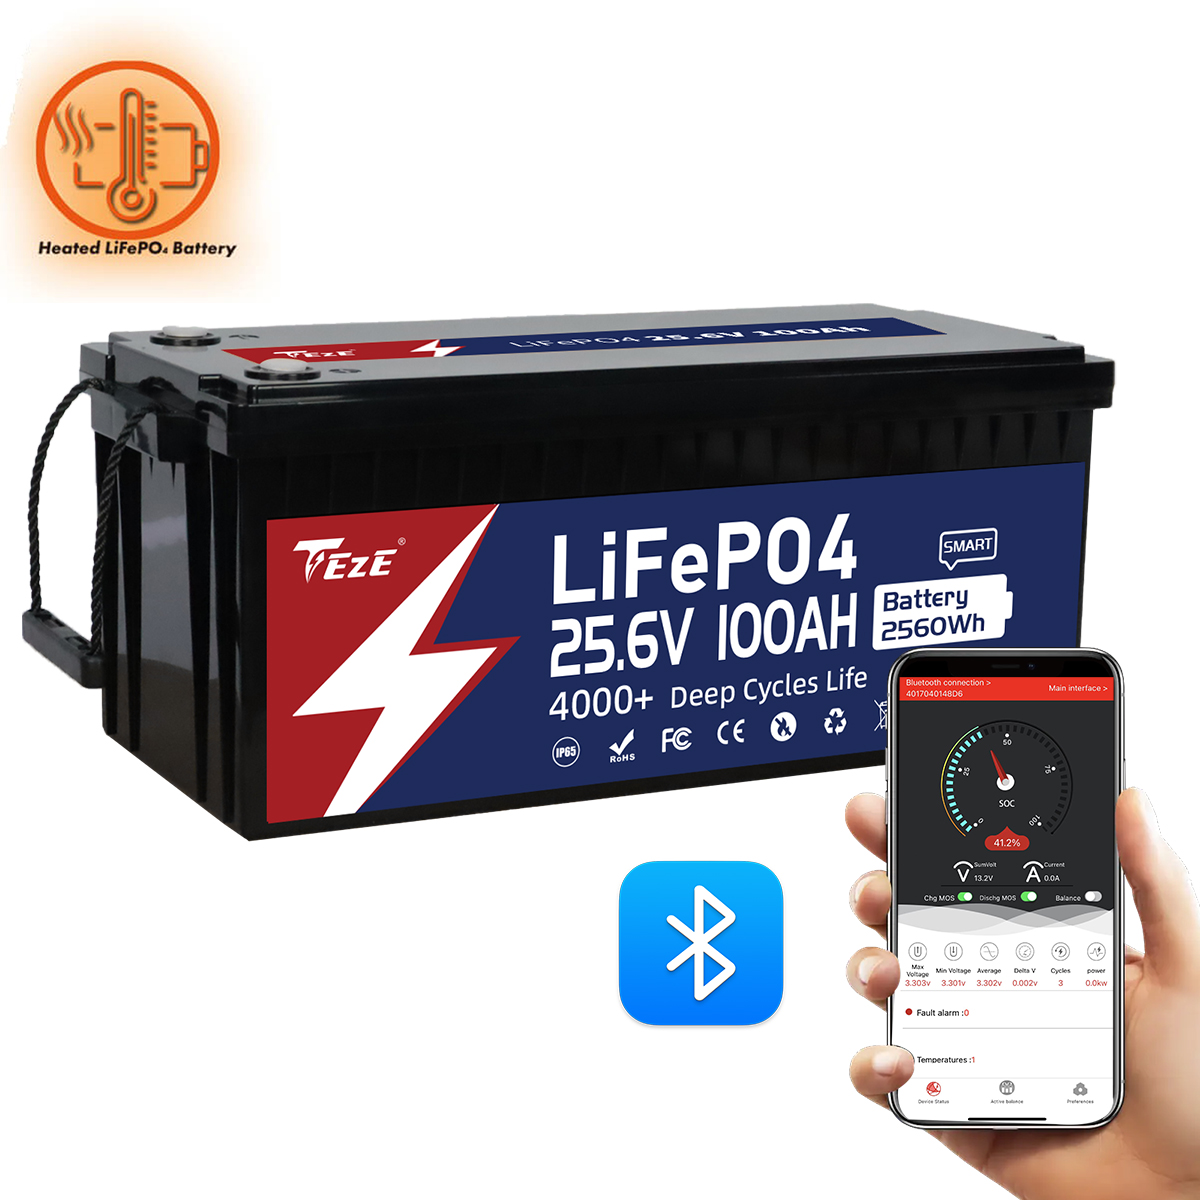 TezePower 24V 100Ah LiFePO4 Battery with Bluetooth, Self-heating and Active Balancer, Built-in 100A Daly BMS(Bluetooth Built-in Version)-TezePower